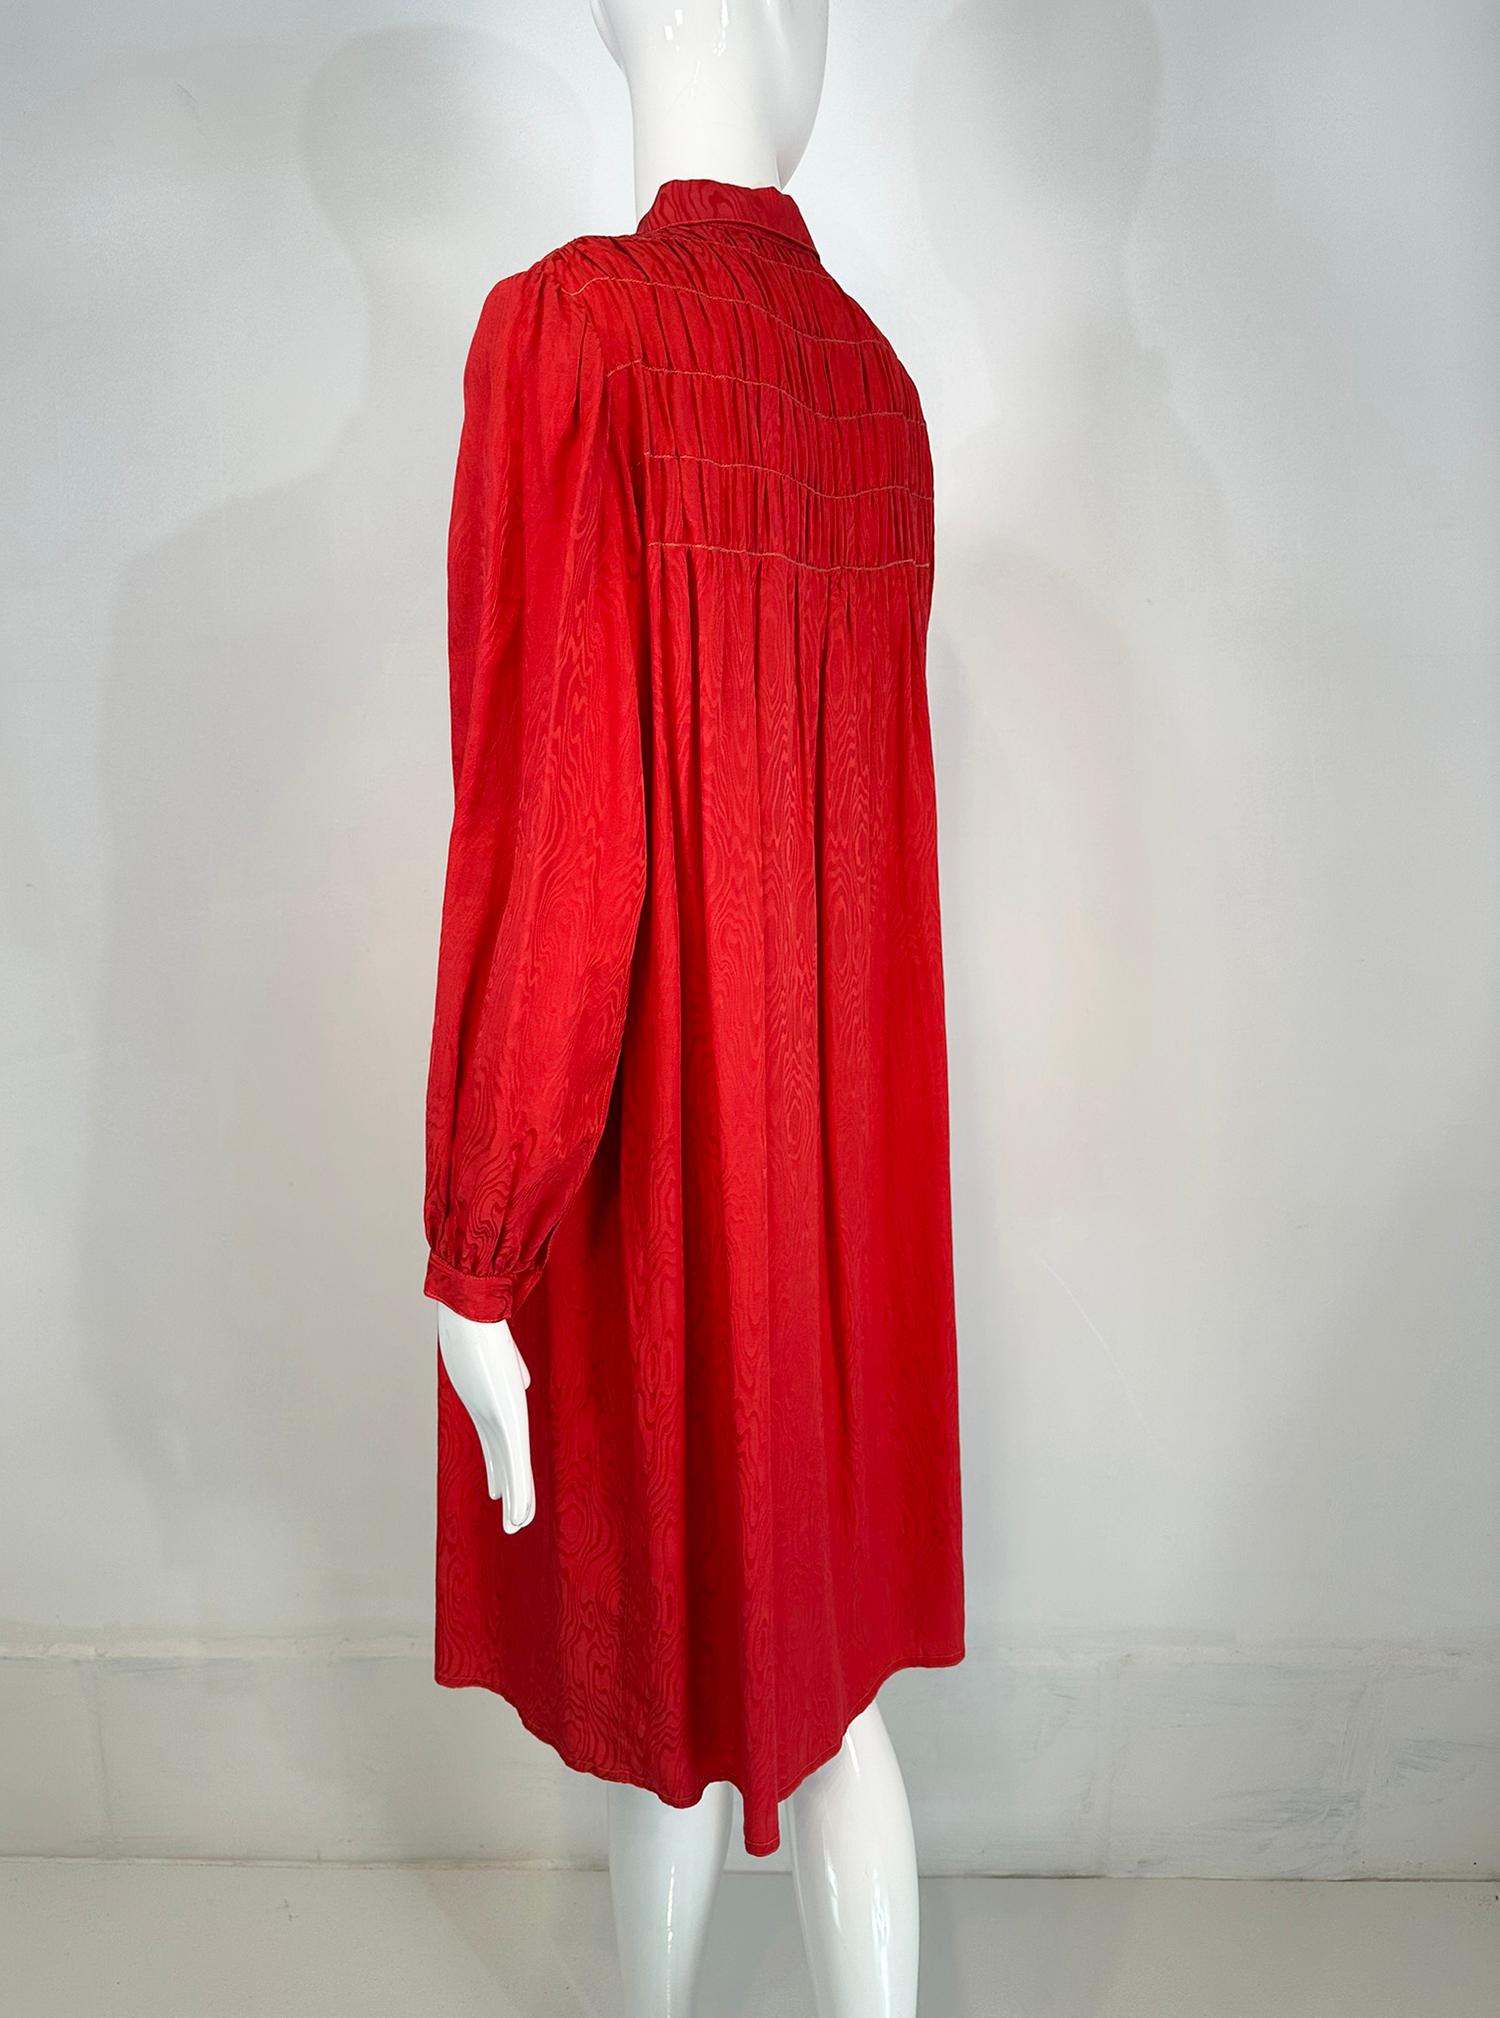 Geoffrey Beene Coral Red Silk Jacquard Smock Dress 1970s For Sale 1